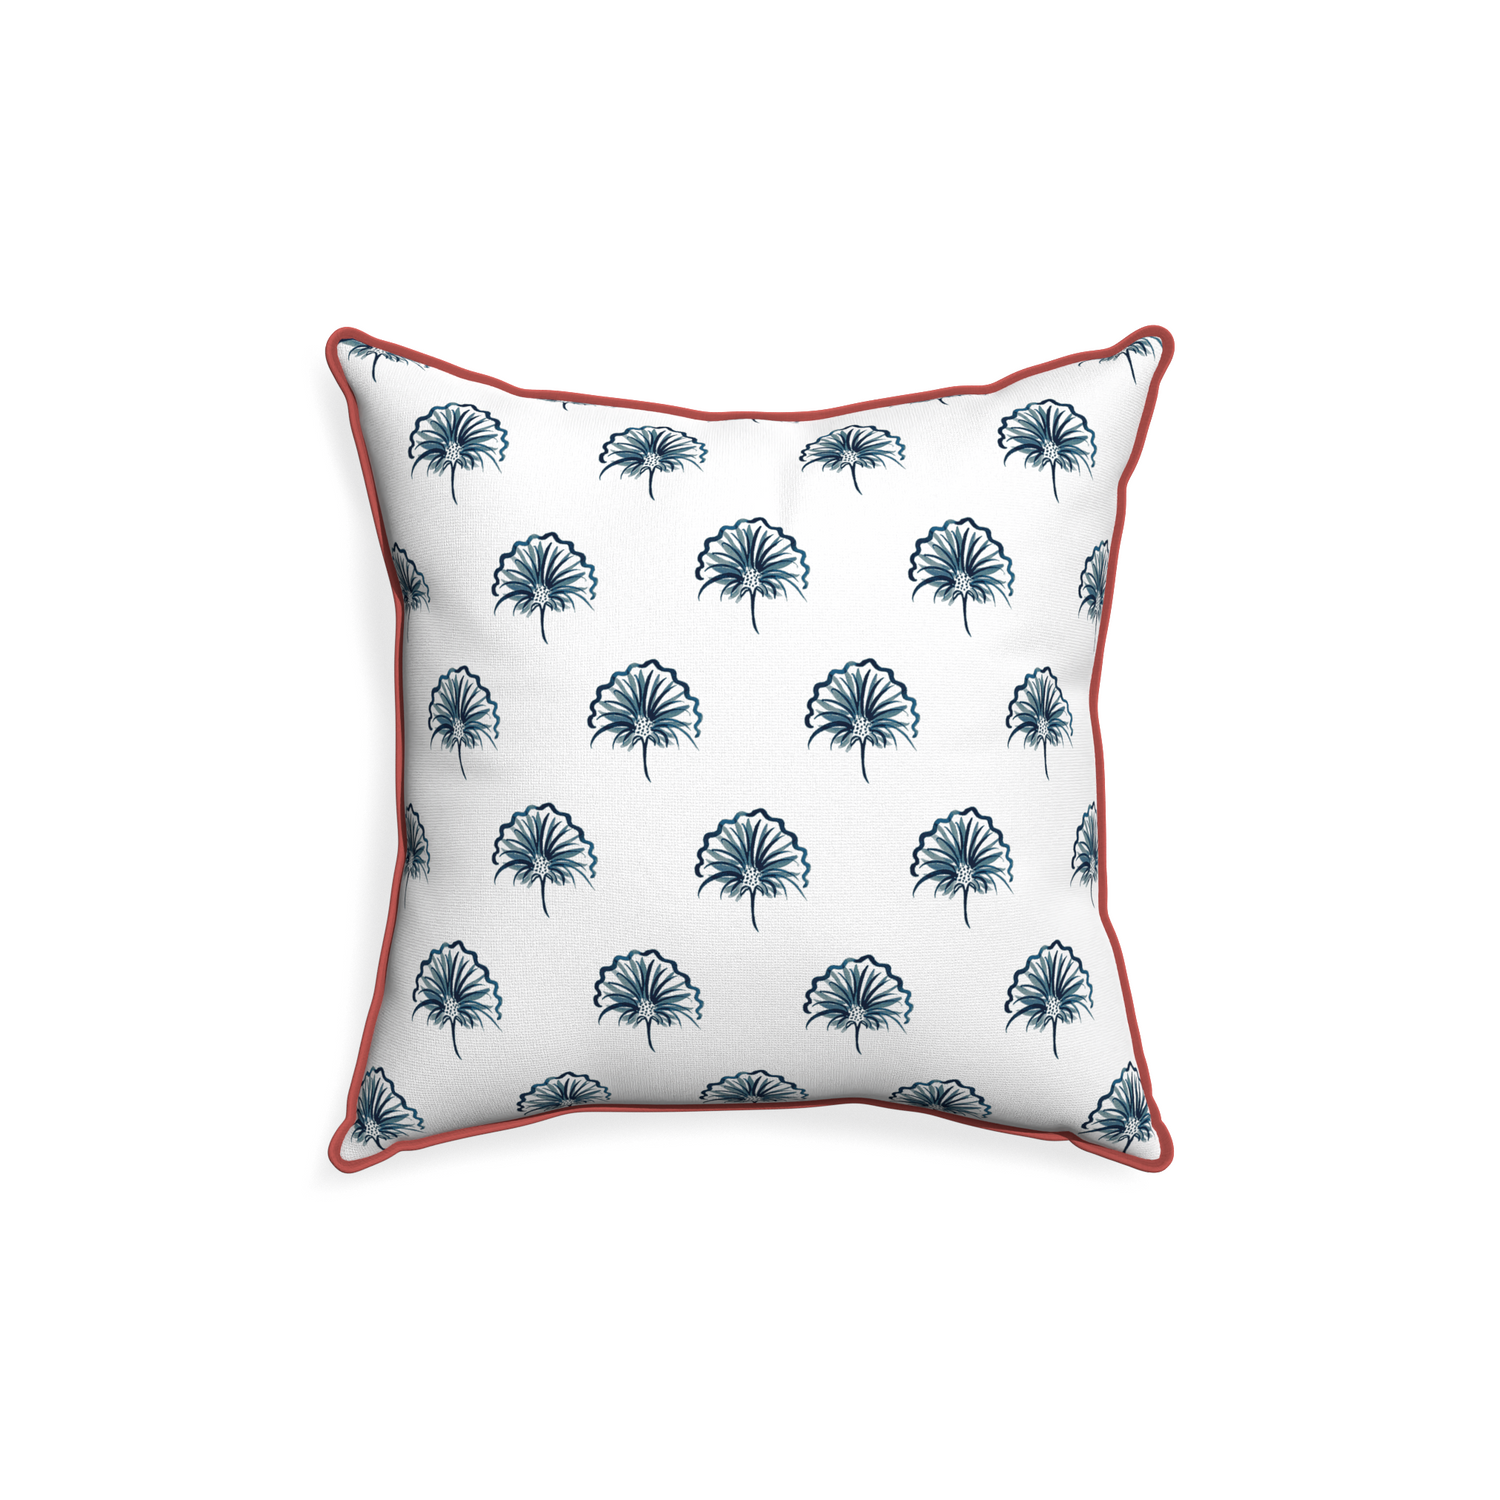 18-square penelope midnight custom floral navypillow with c piping on white background